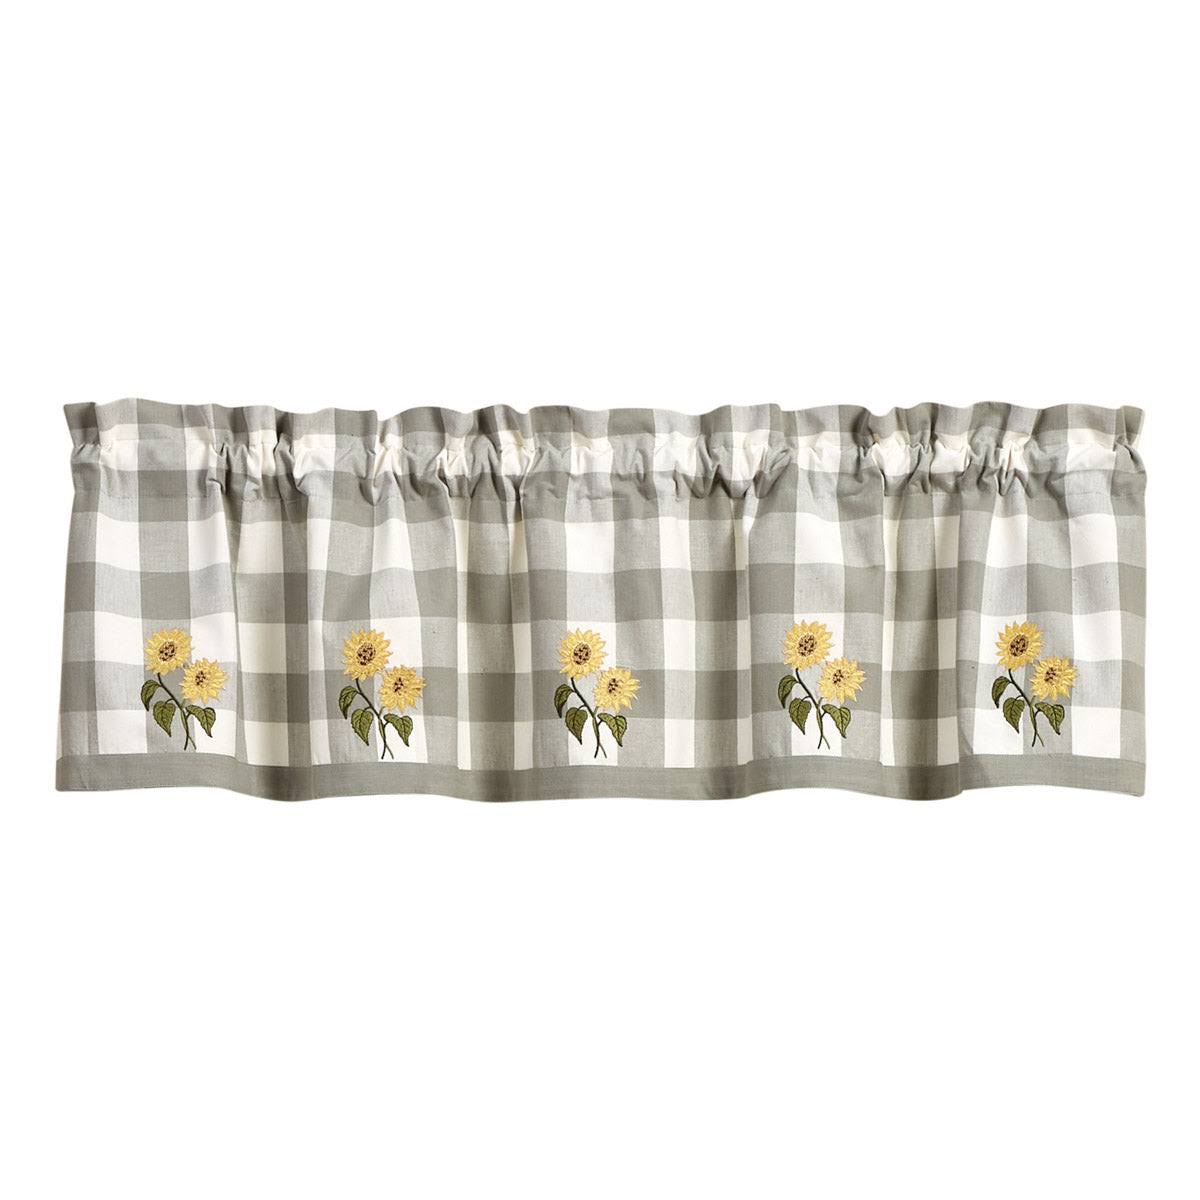 Wicklow Check Sunflower Embroidered Lined Valance 14" L